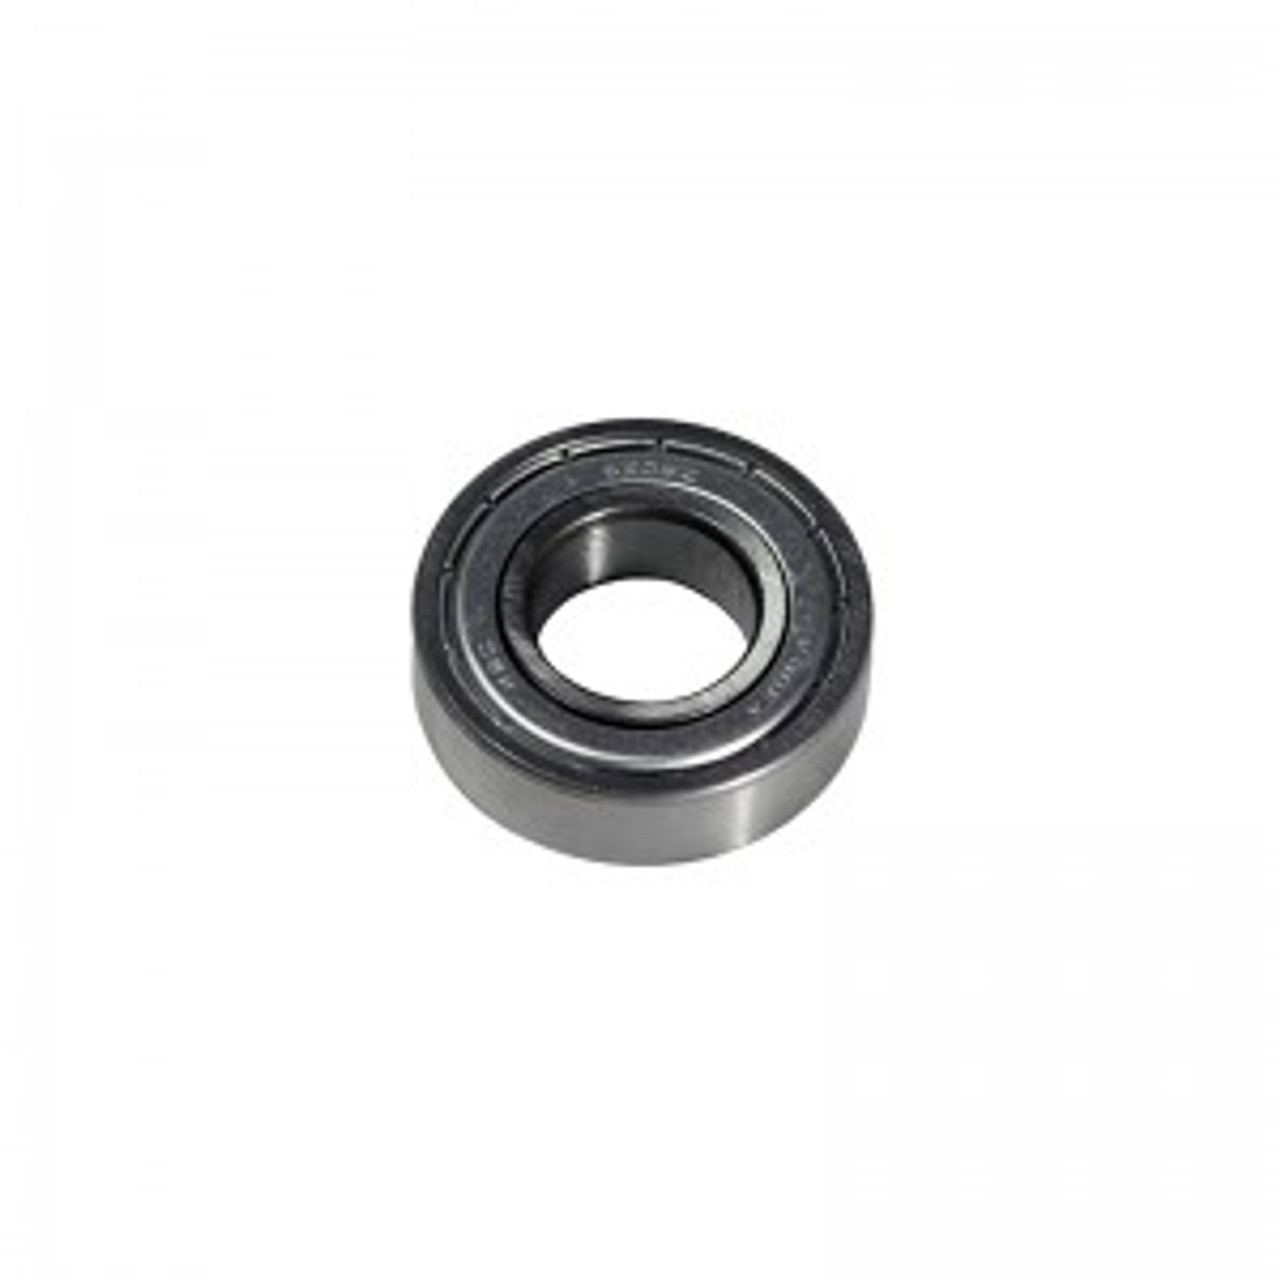 Butcher Boy Lower Main Bearing  for Meat Saws  24-90300 BBSLMB